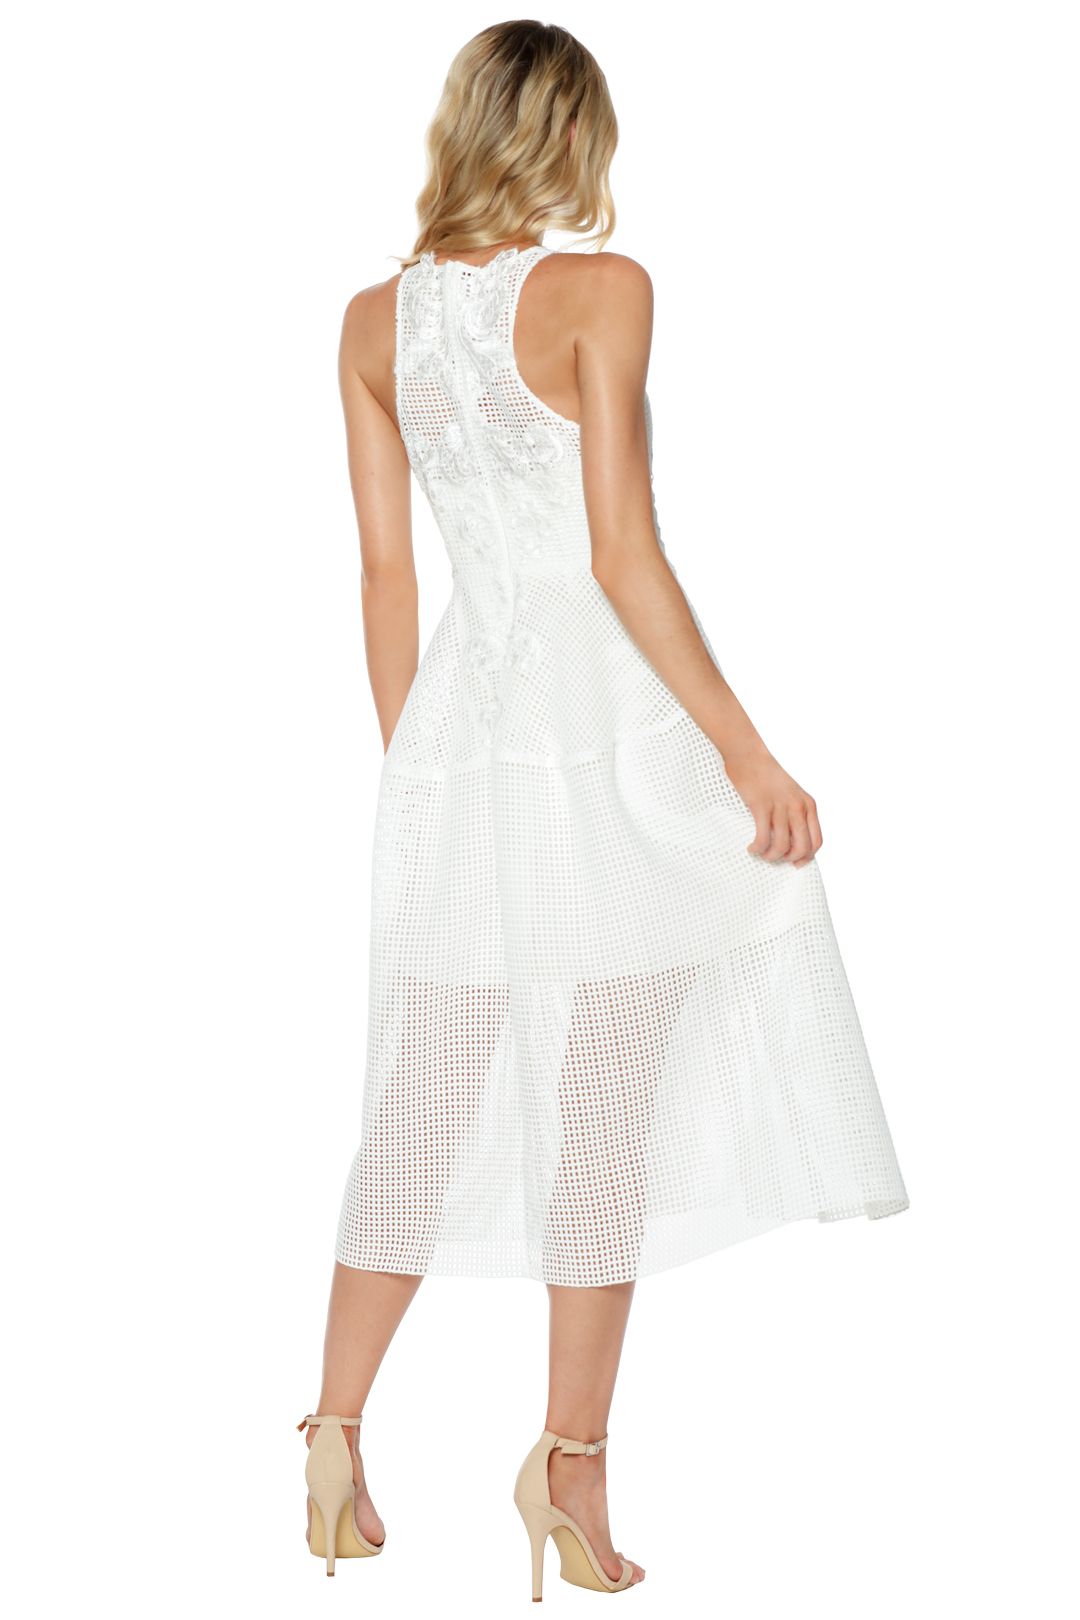 Thurley - Bianca Embroidered Dress - White - Back 